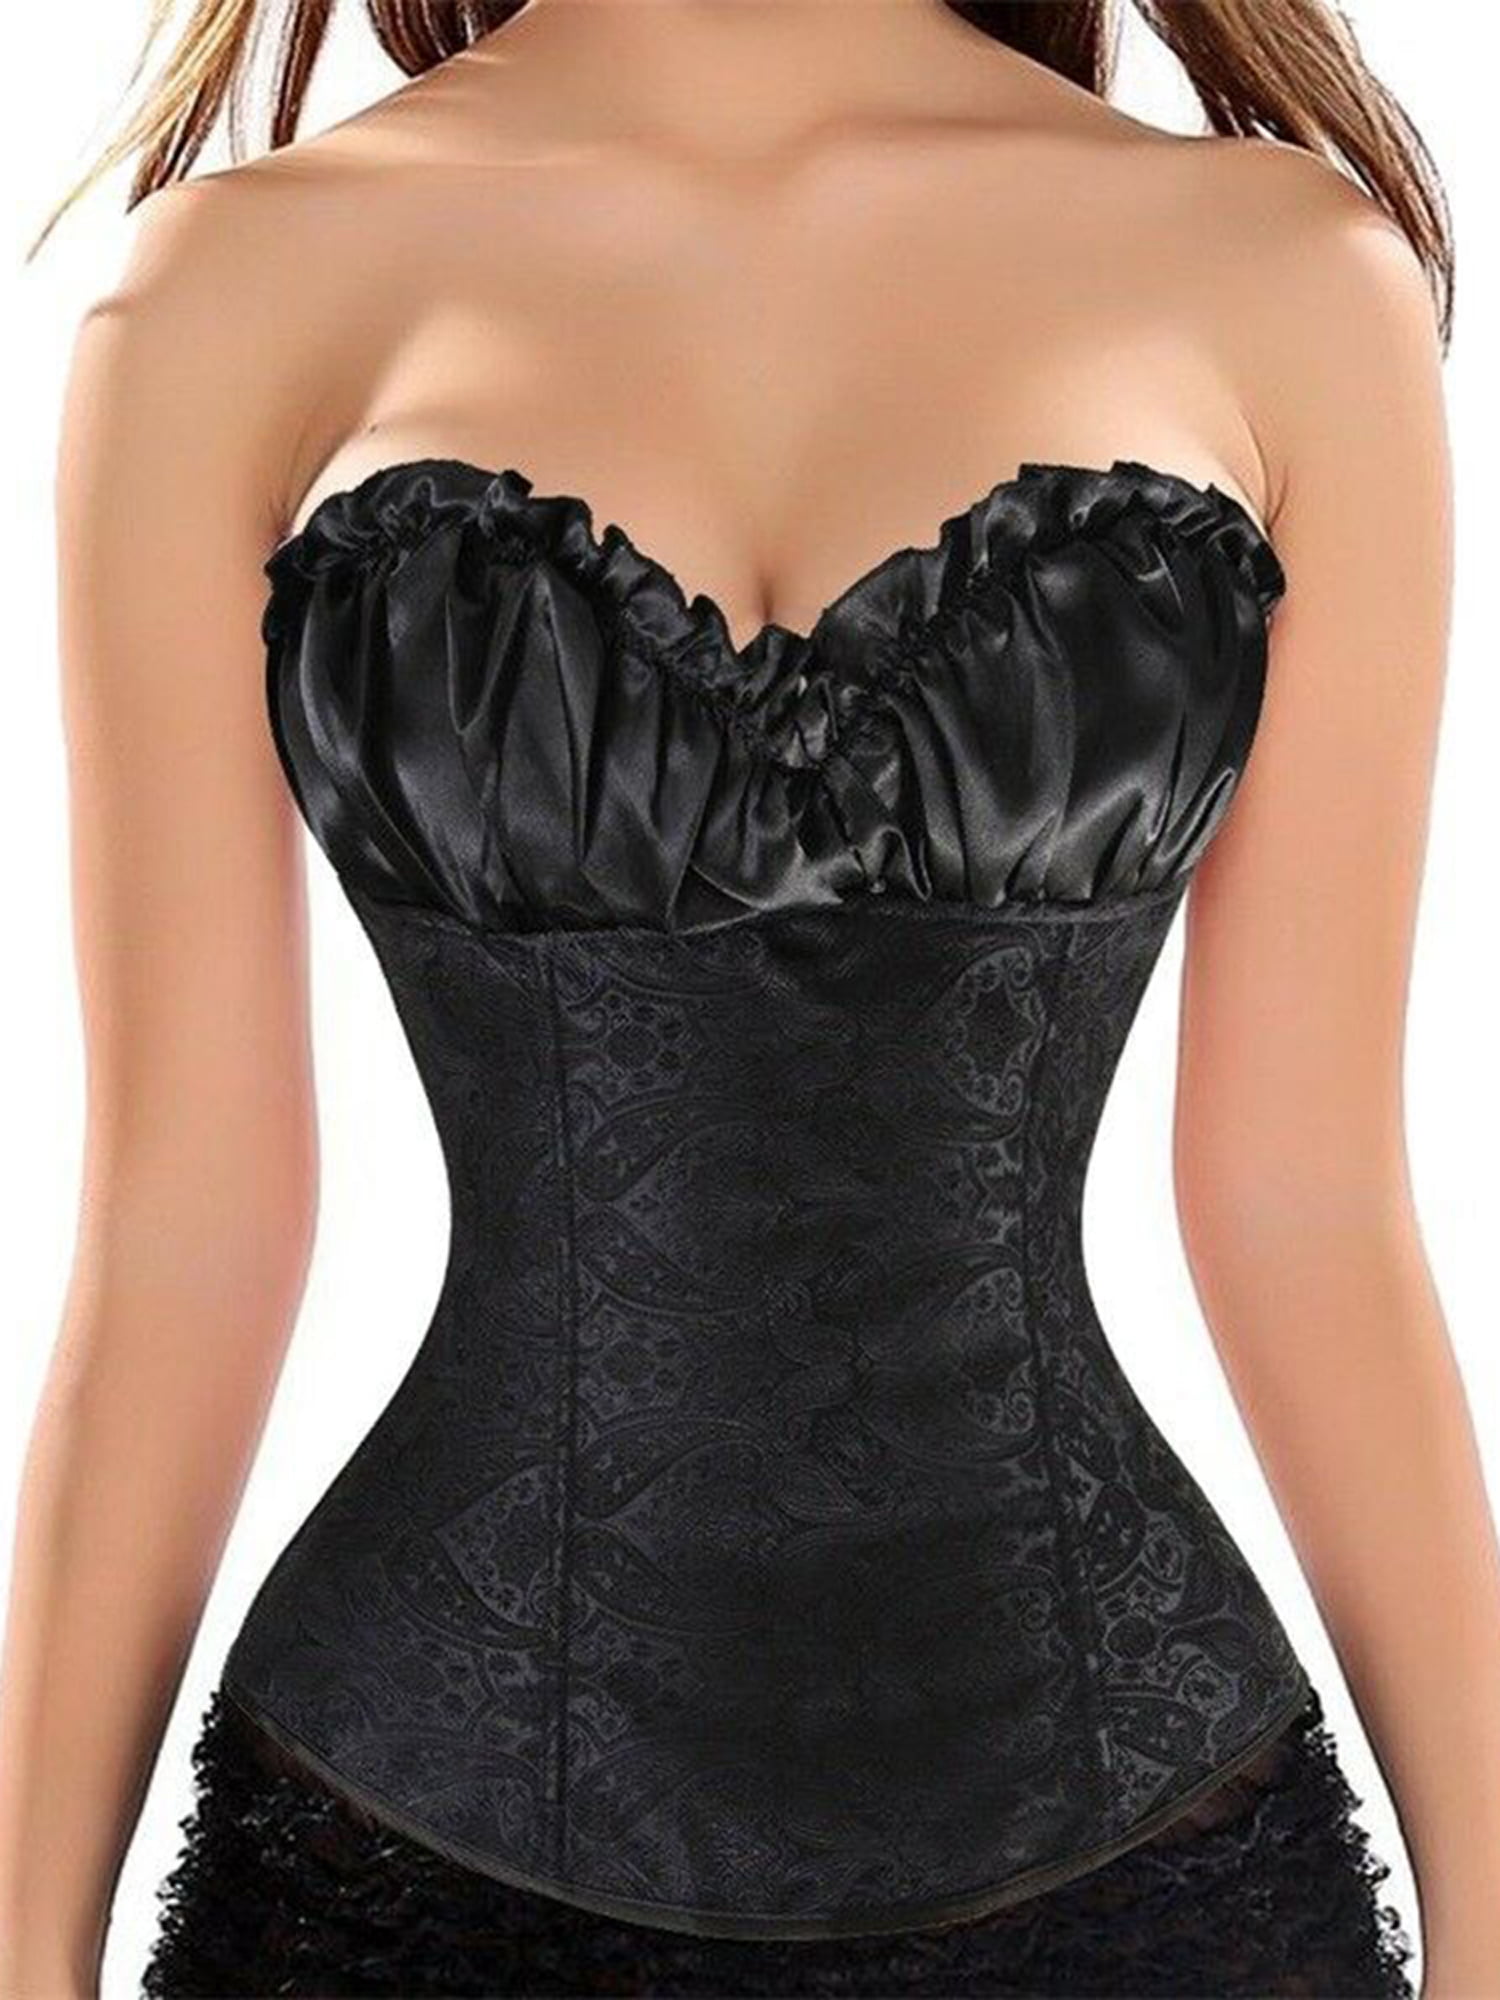 Women's Lace Up Boned Jacquard Brocade Waist Training Underbust Corset colour Red and  Black